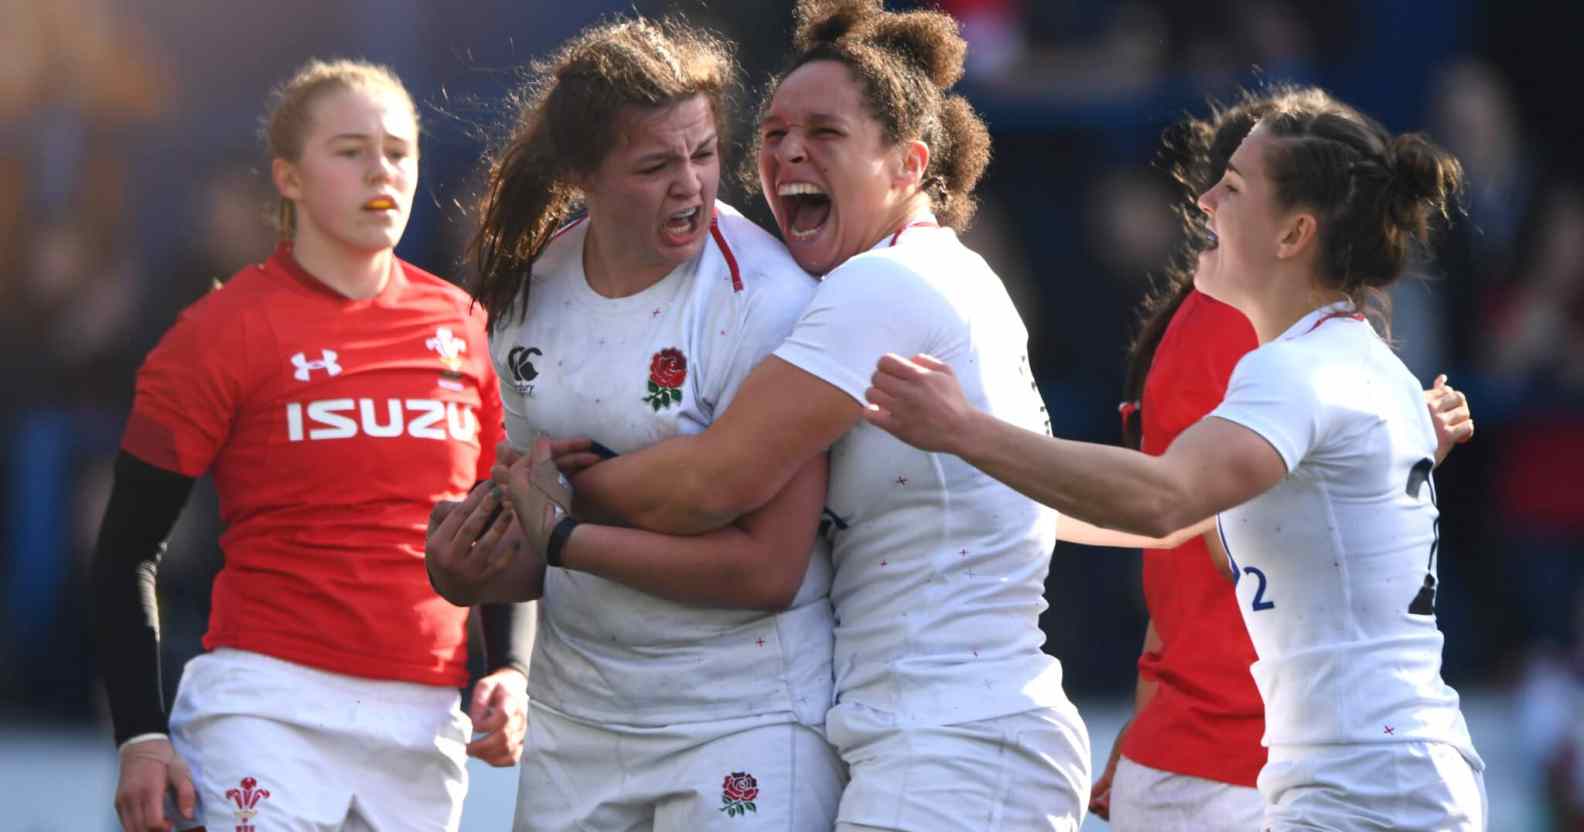 English women's rugby players cheer and shout on the field